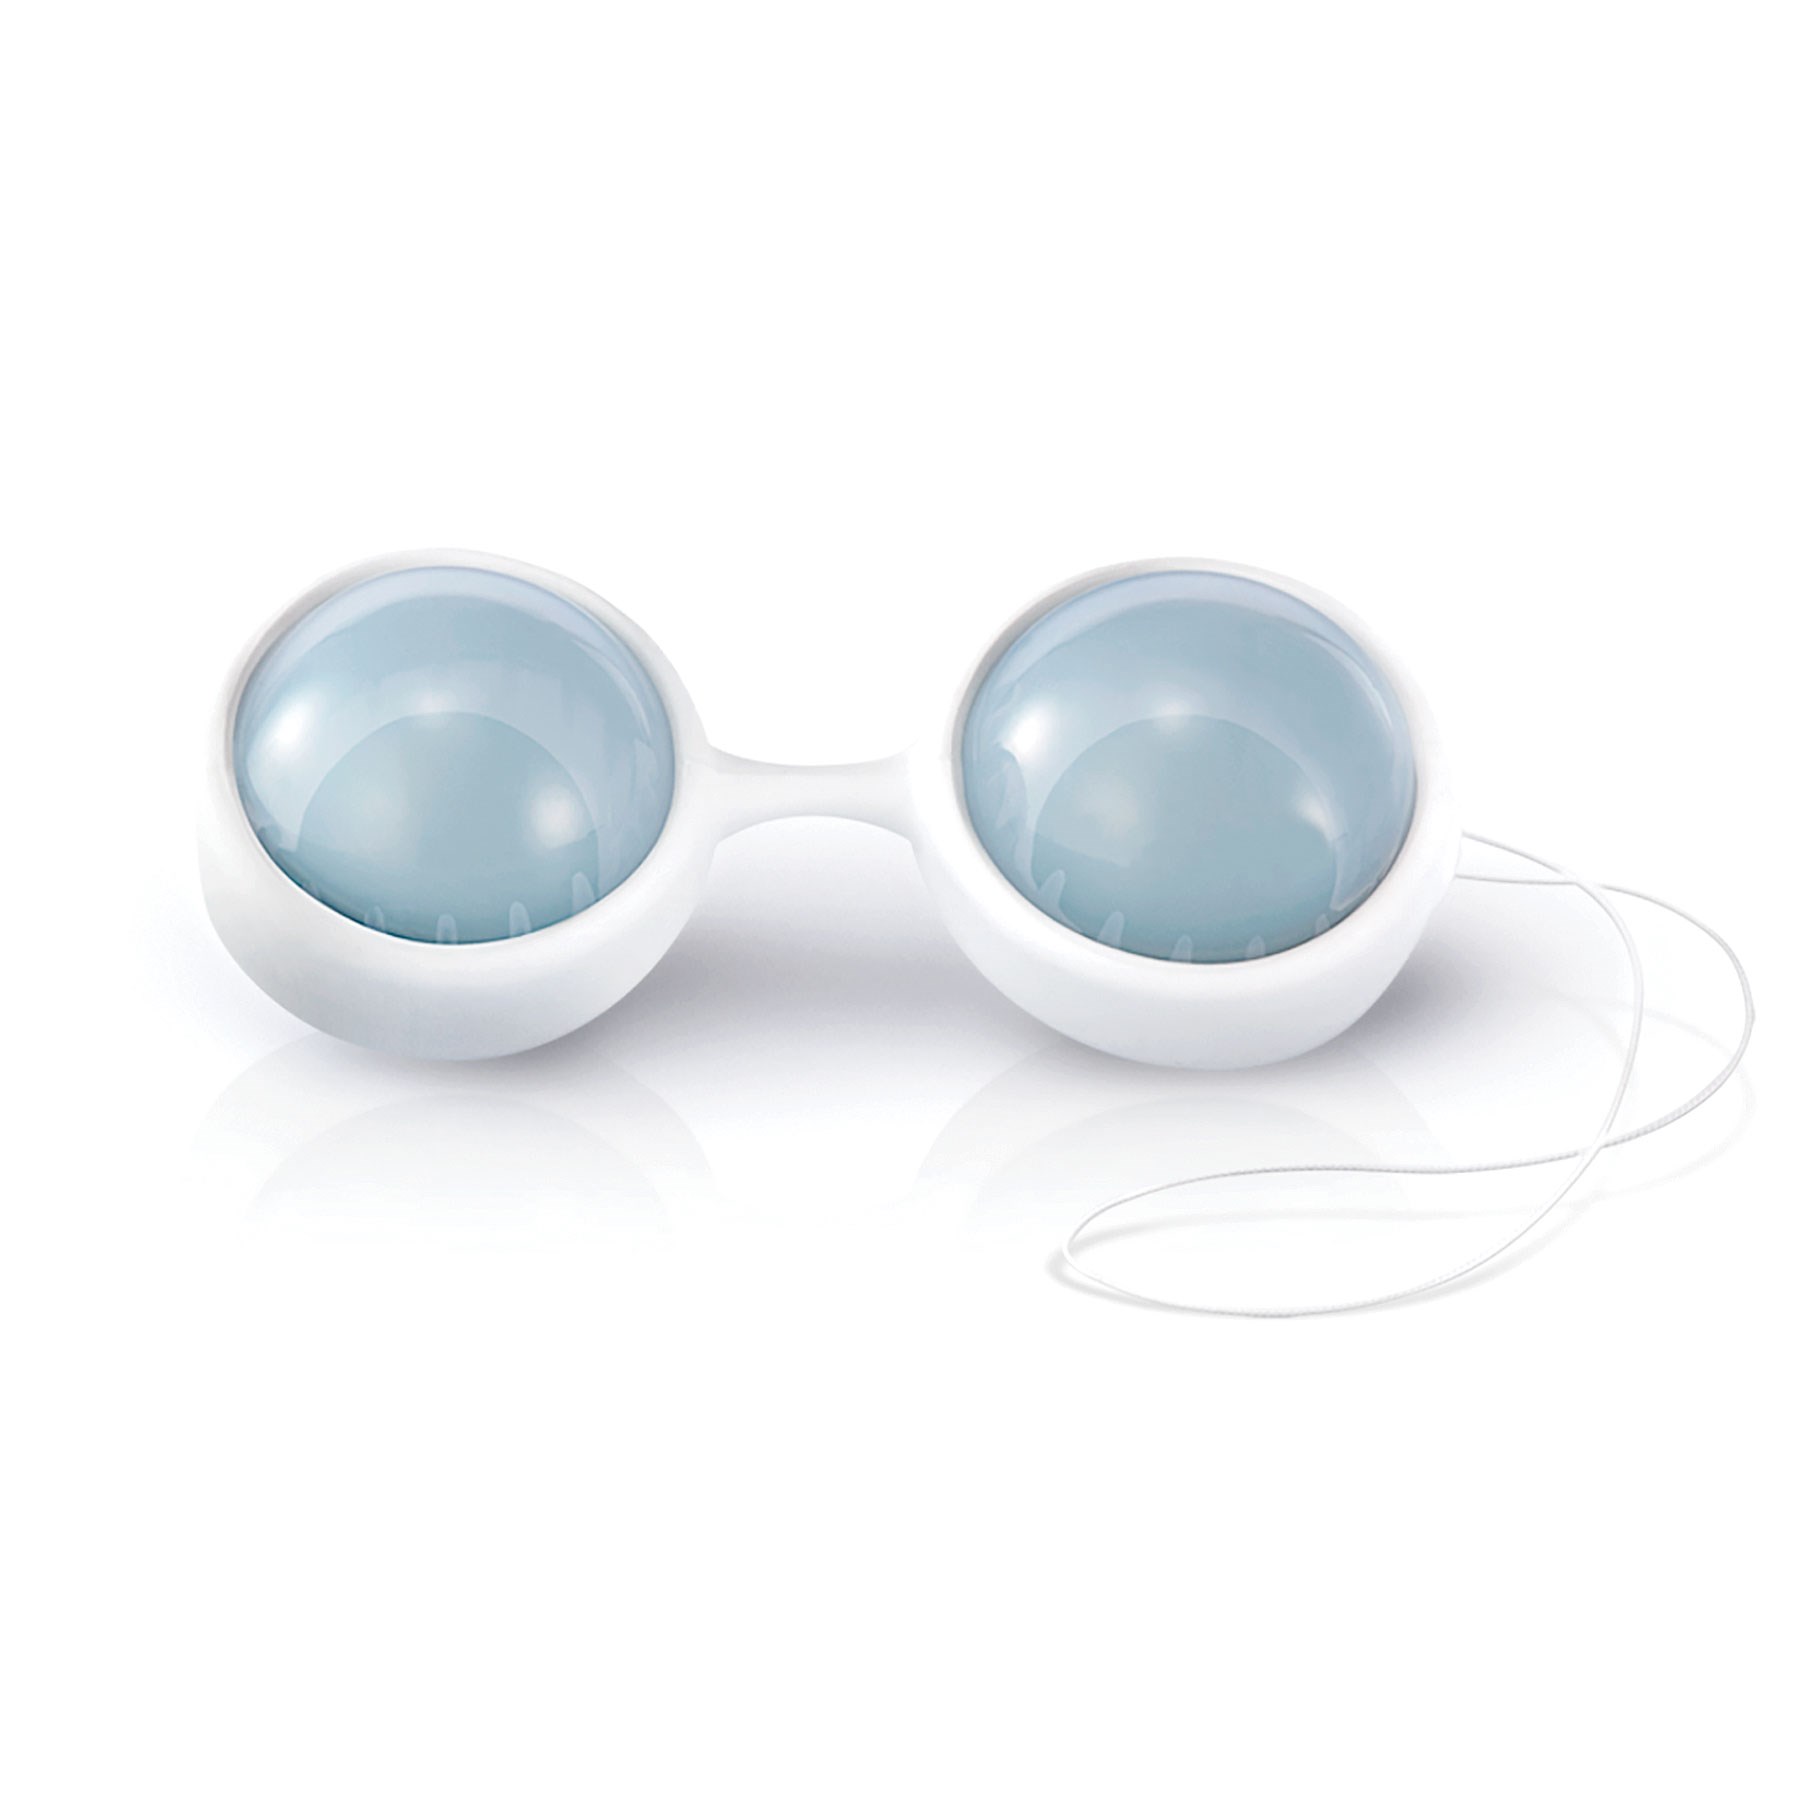 Lelo Luna Beads Plus with blue weights